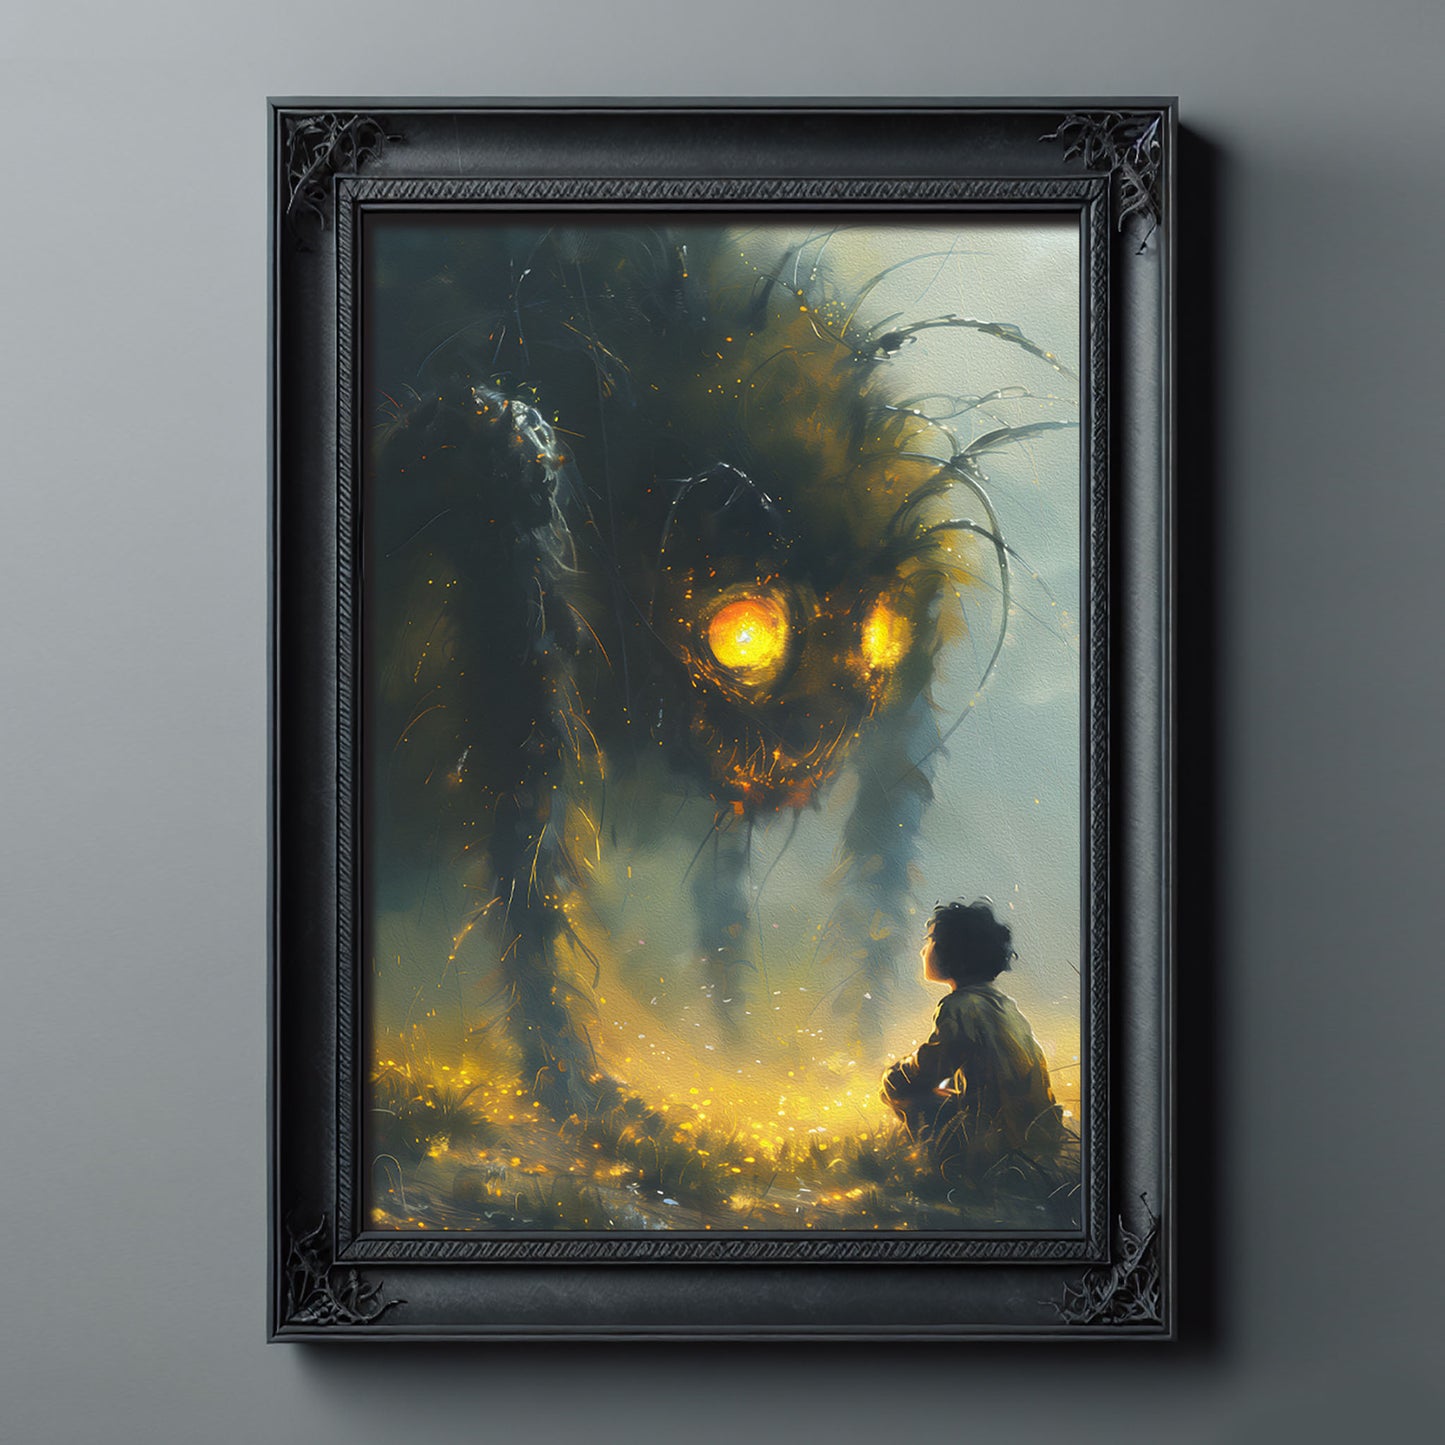 Poster Wall Art featuring a Boy and a Huge Spider